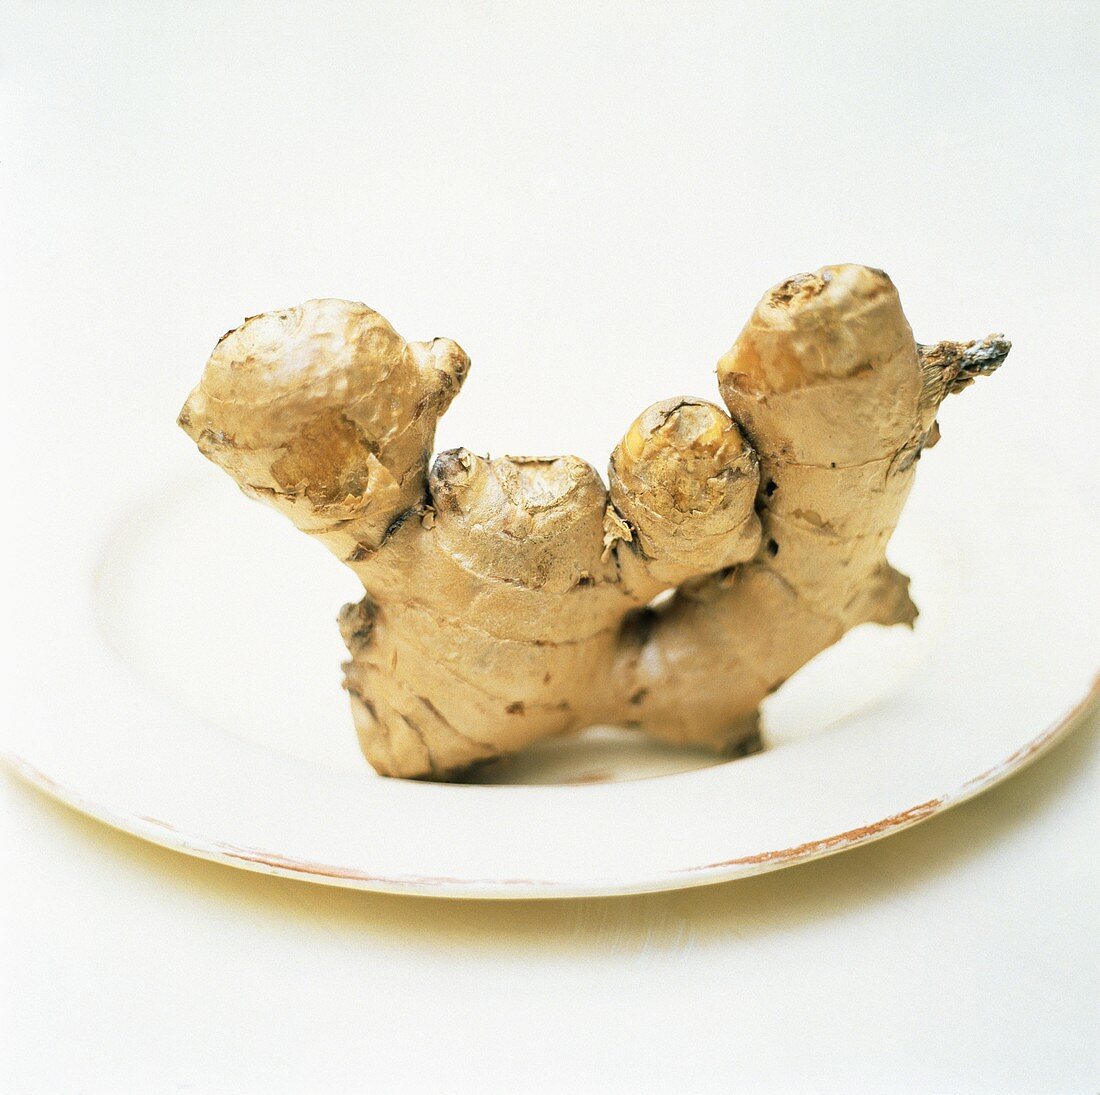 Fresh Ginger Root on a Plate